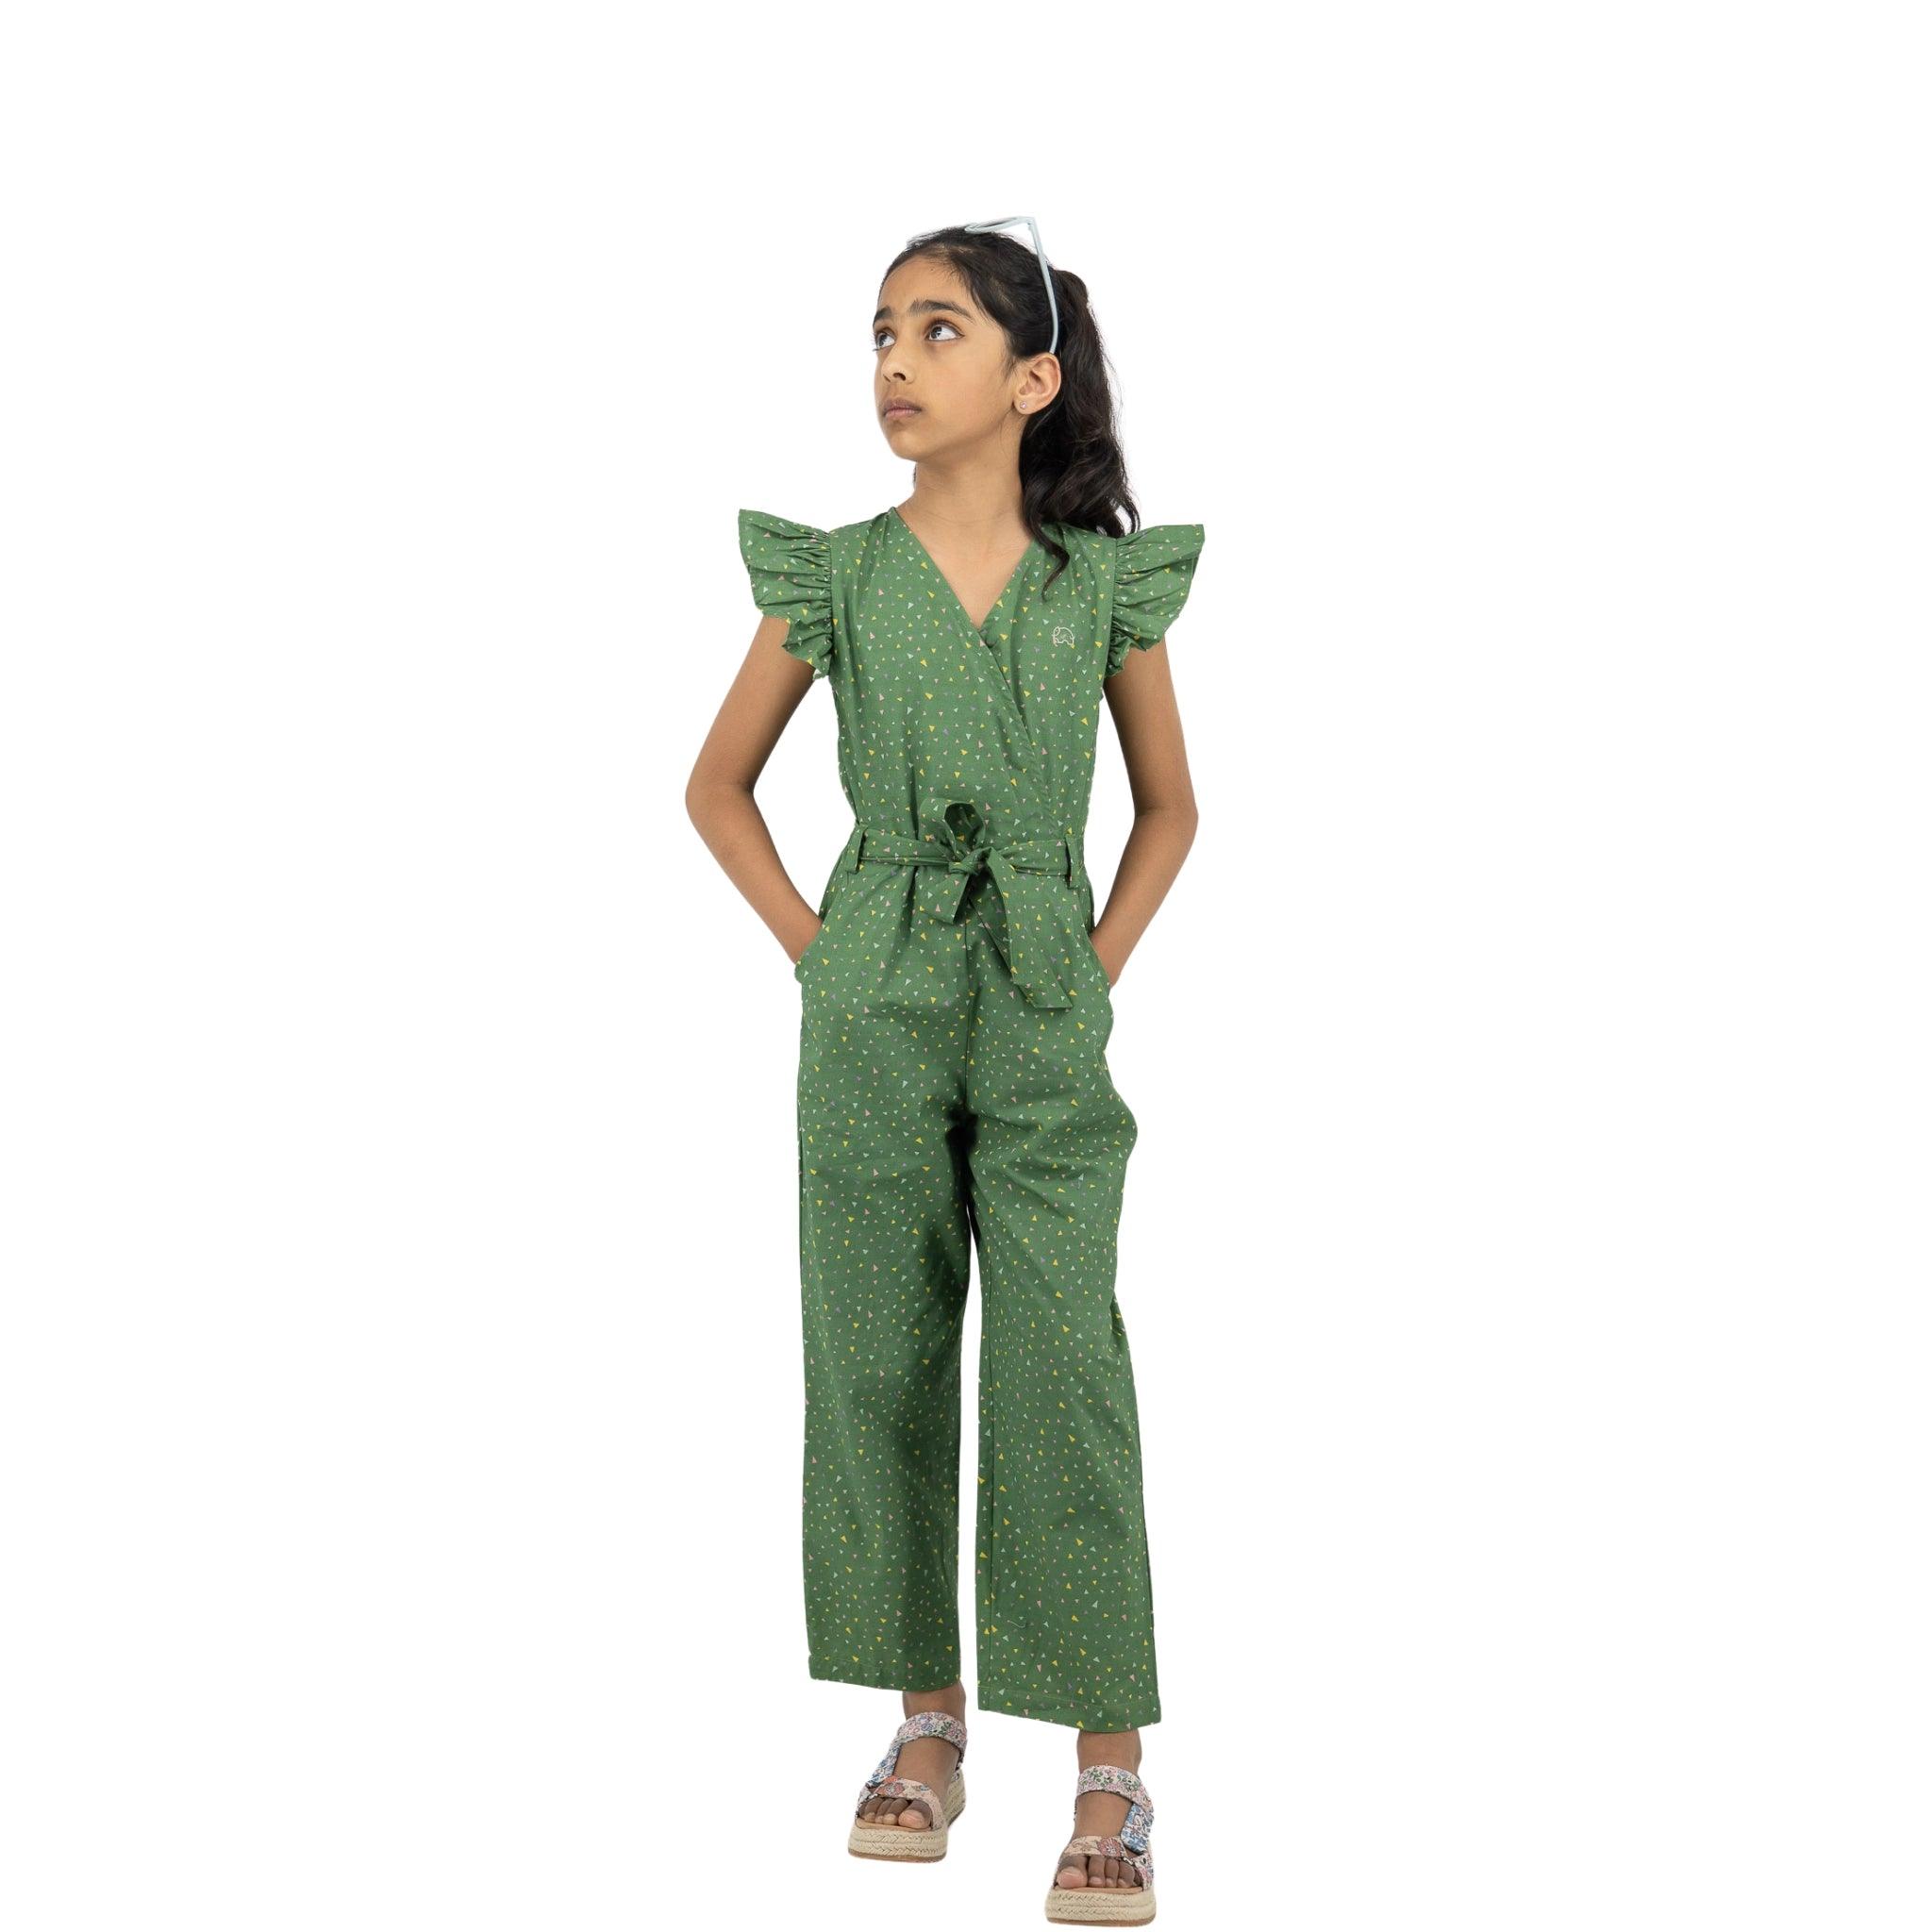 Young girl in a Karee Green Confetti Cotton V-Neck Jumpsuit for Kids with ruffled sleeves, standing and looking to her left, isolated on a white background.